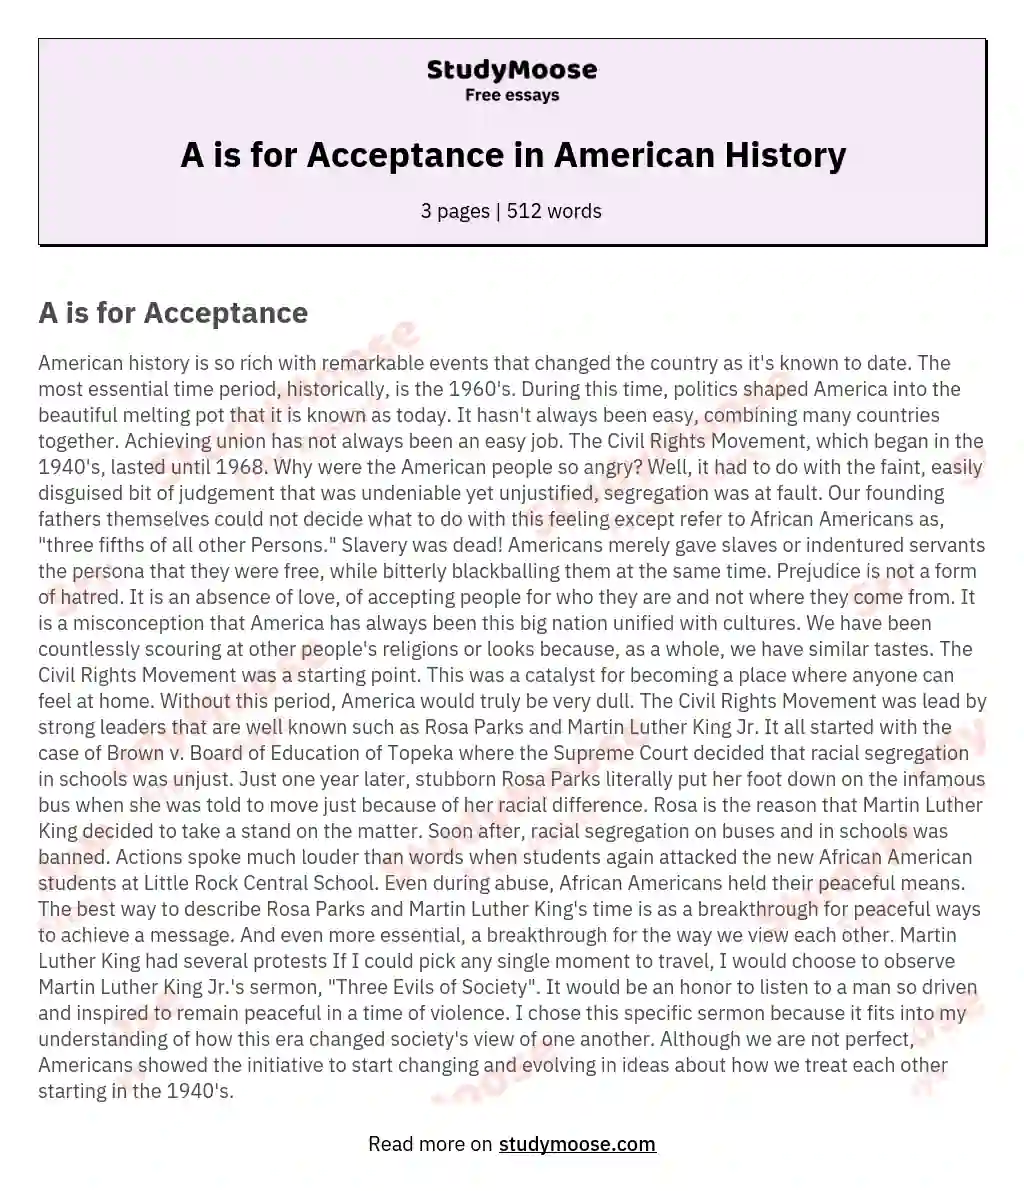 A is for Acceptance in American History essay